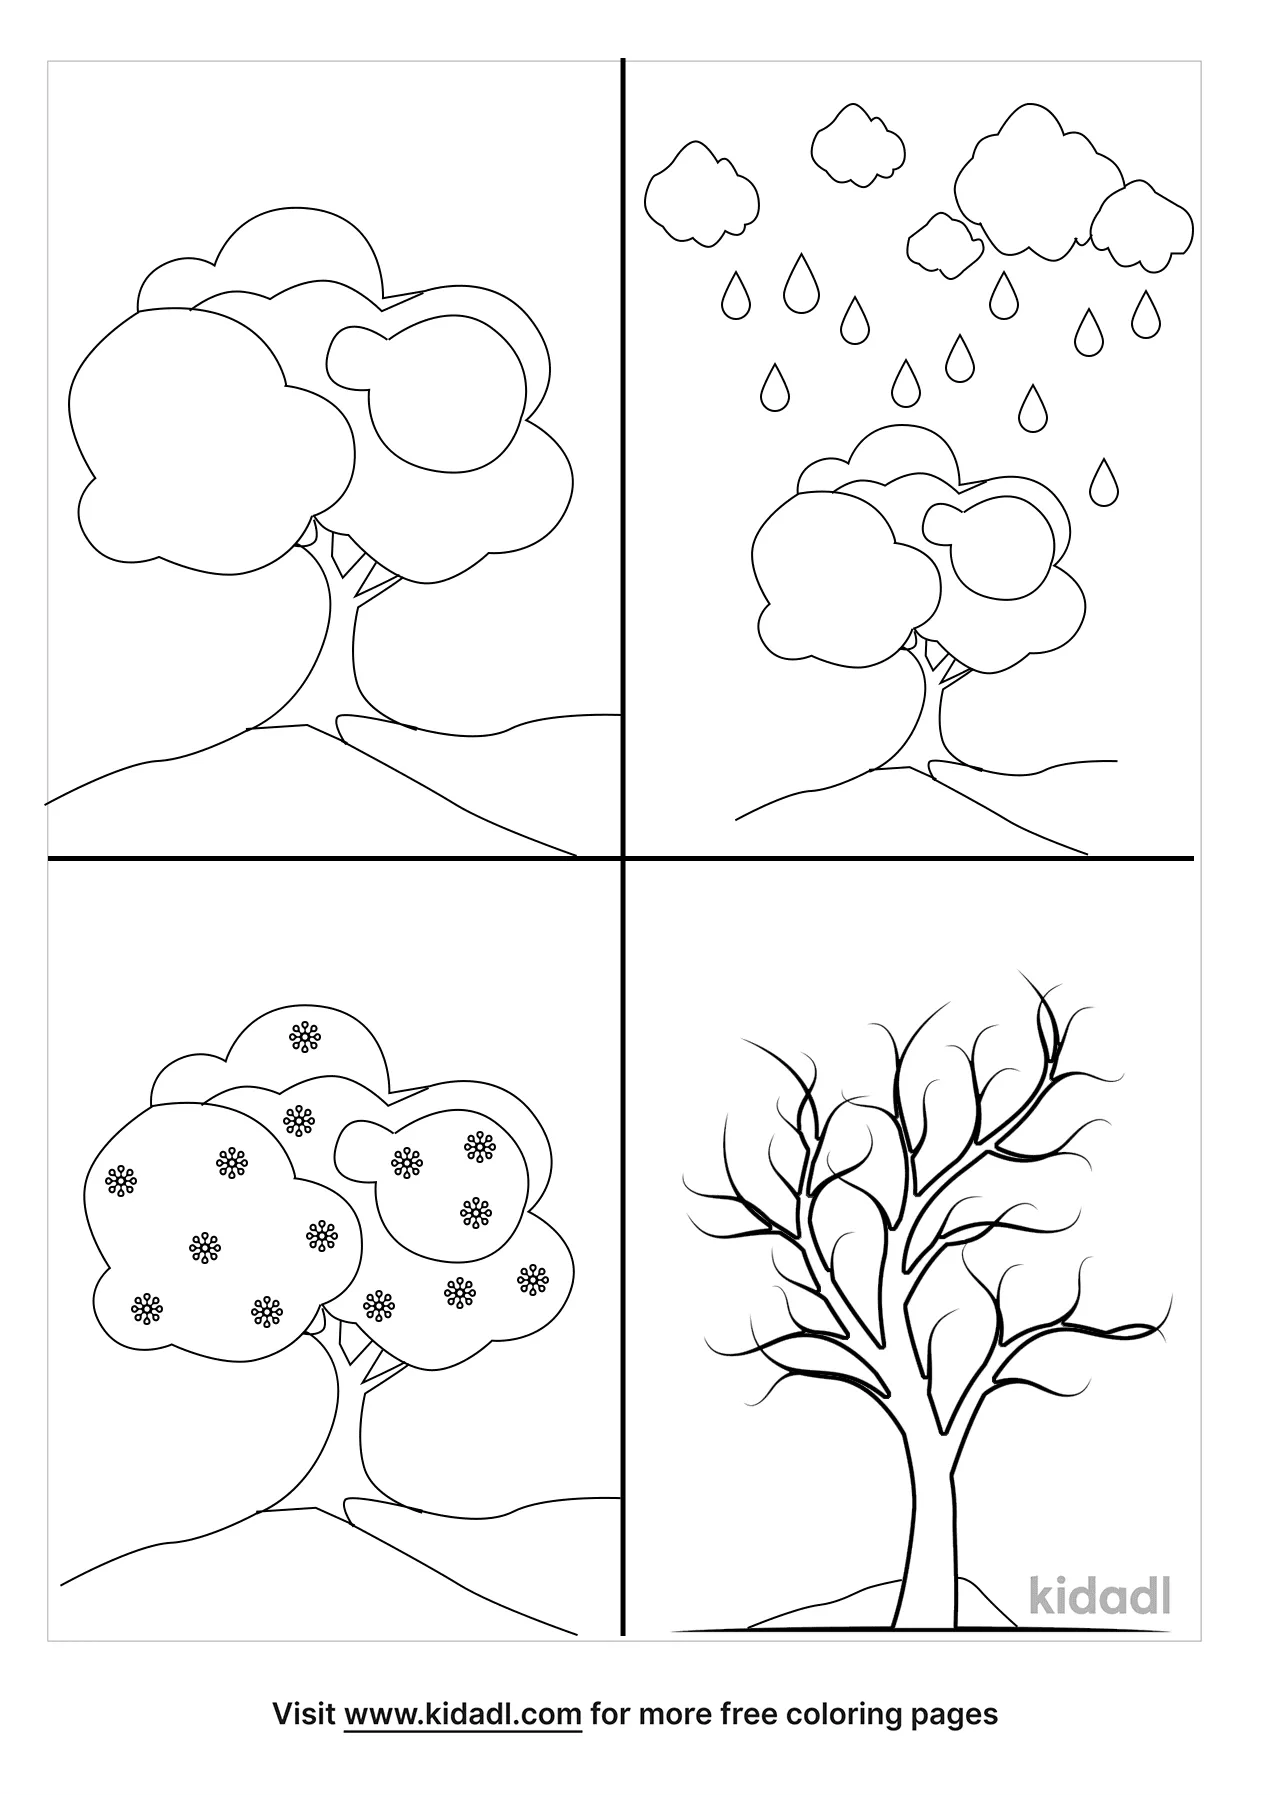 Four Seasons Coloring Pages Free Spring Coloring Pages Kidadl